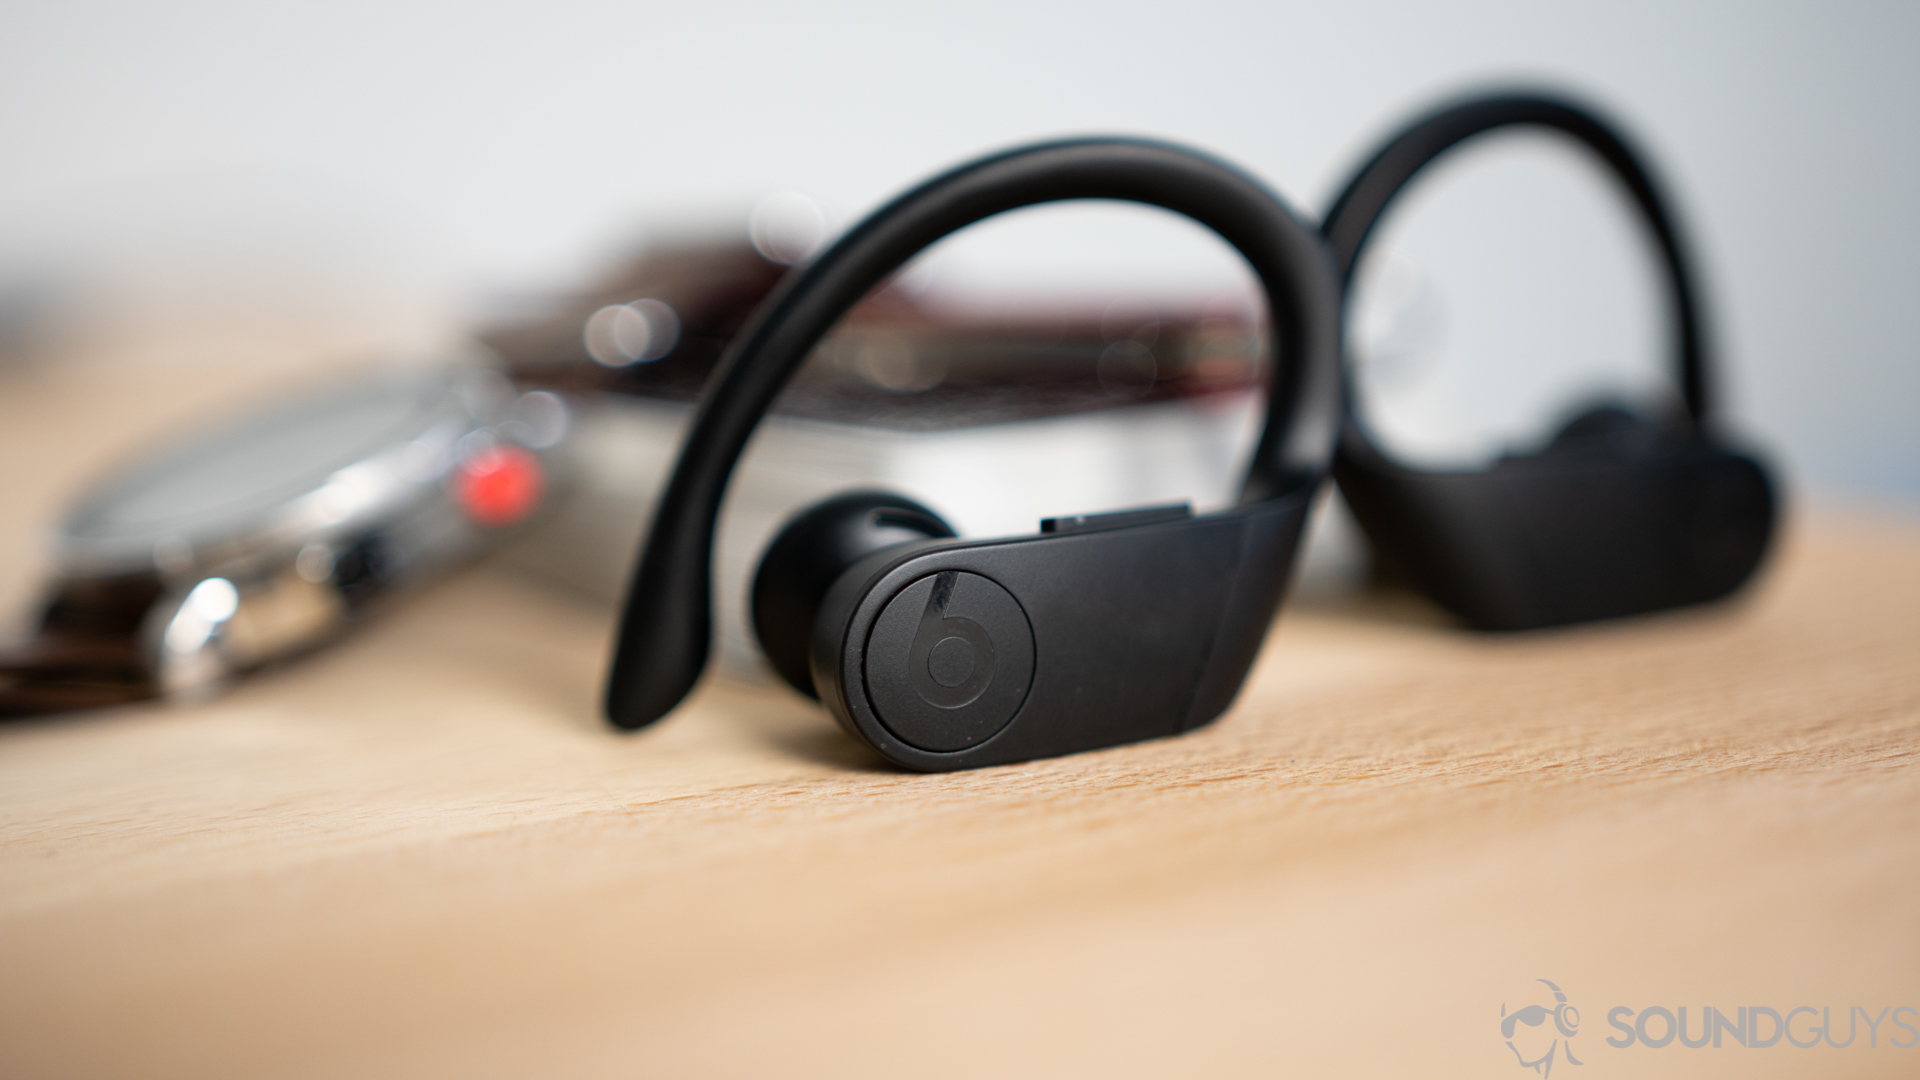 The playback control buttons on the Beats Powerbeats Pro.